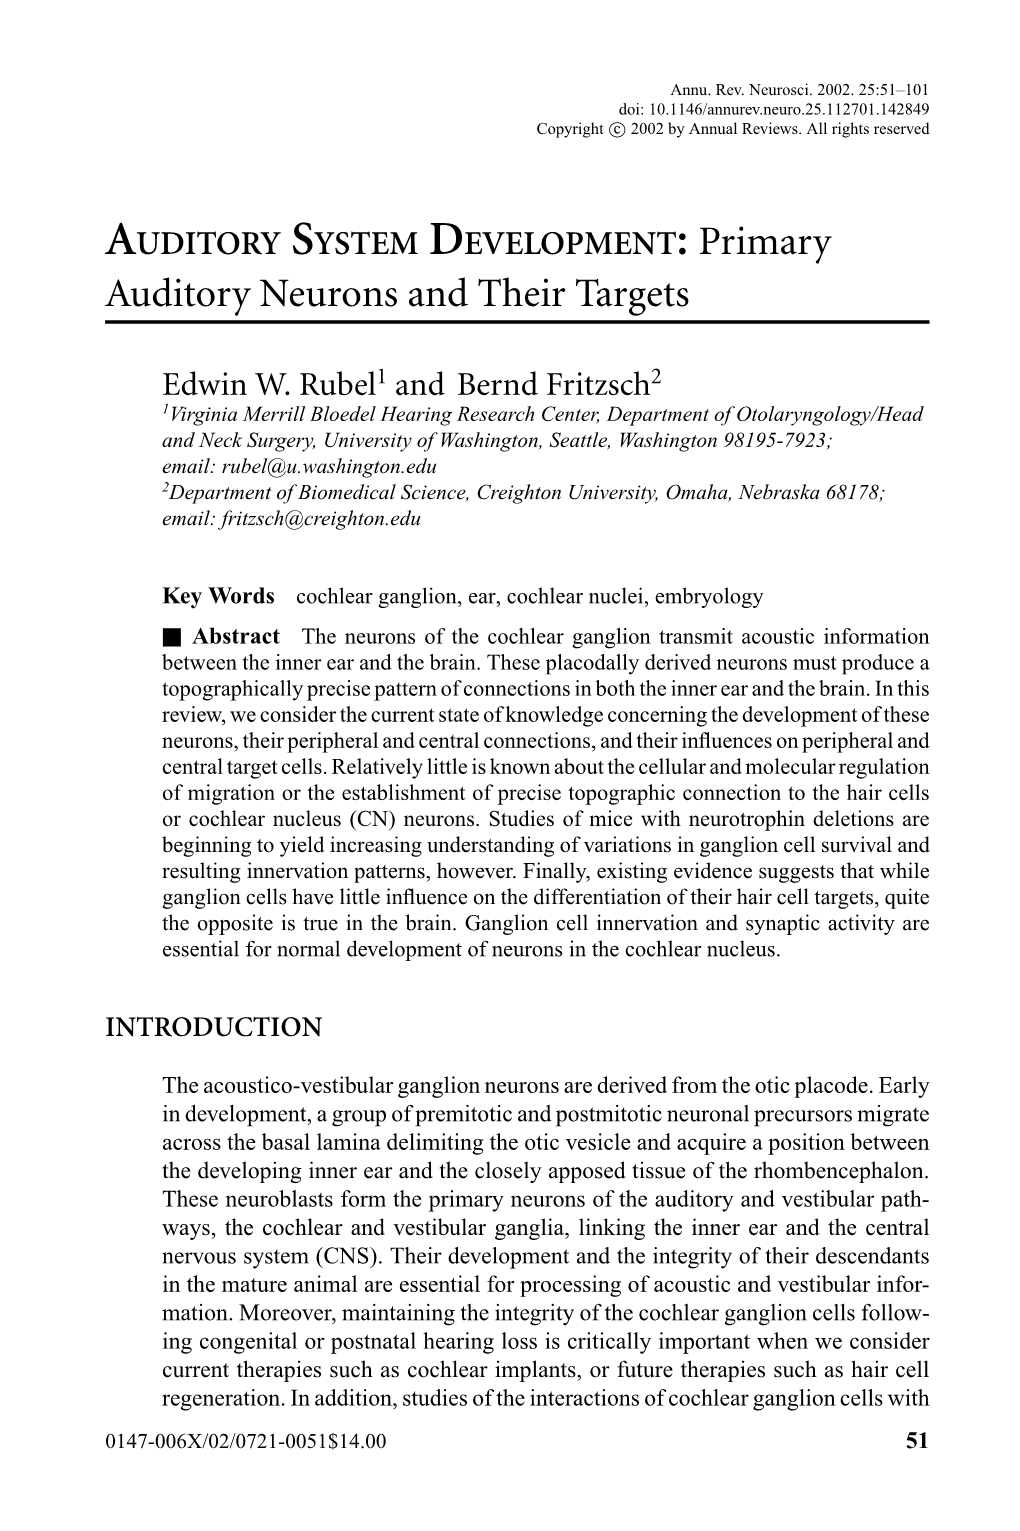 Auditory Neurons and Their Targets